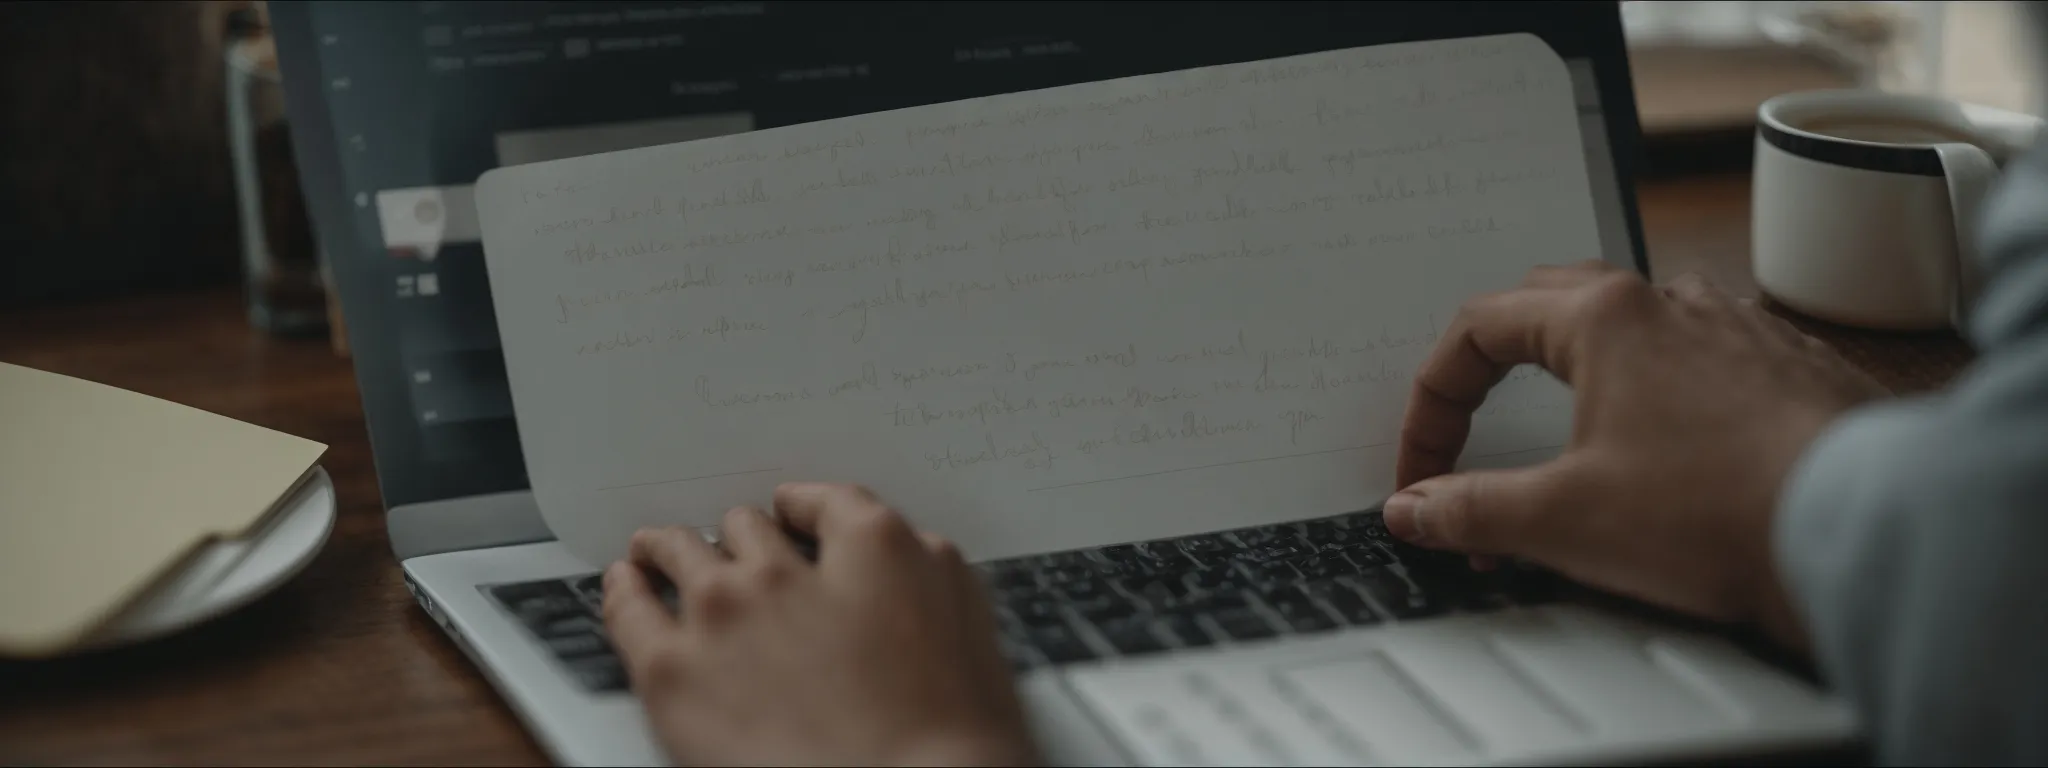 a person typing on a laptop with an open notebook beside them, displaying handwritten notes about seo strategies.